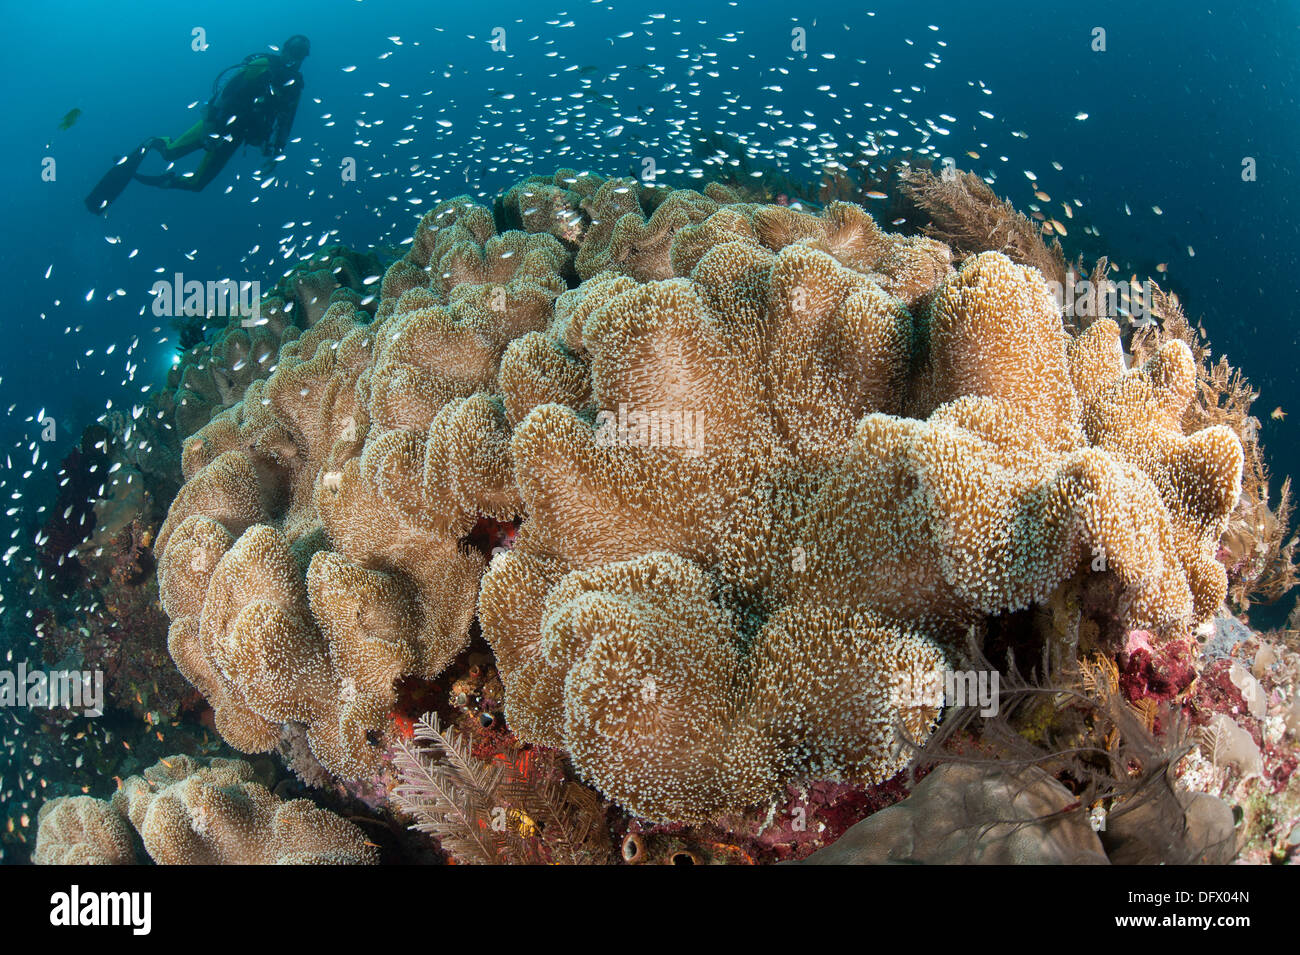 Diver approaching large group of mushroom leather coral (Sarcophyton sp.), Raja Ampat, Indonesia. Stock Photo